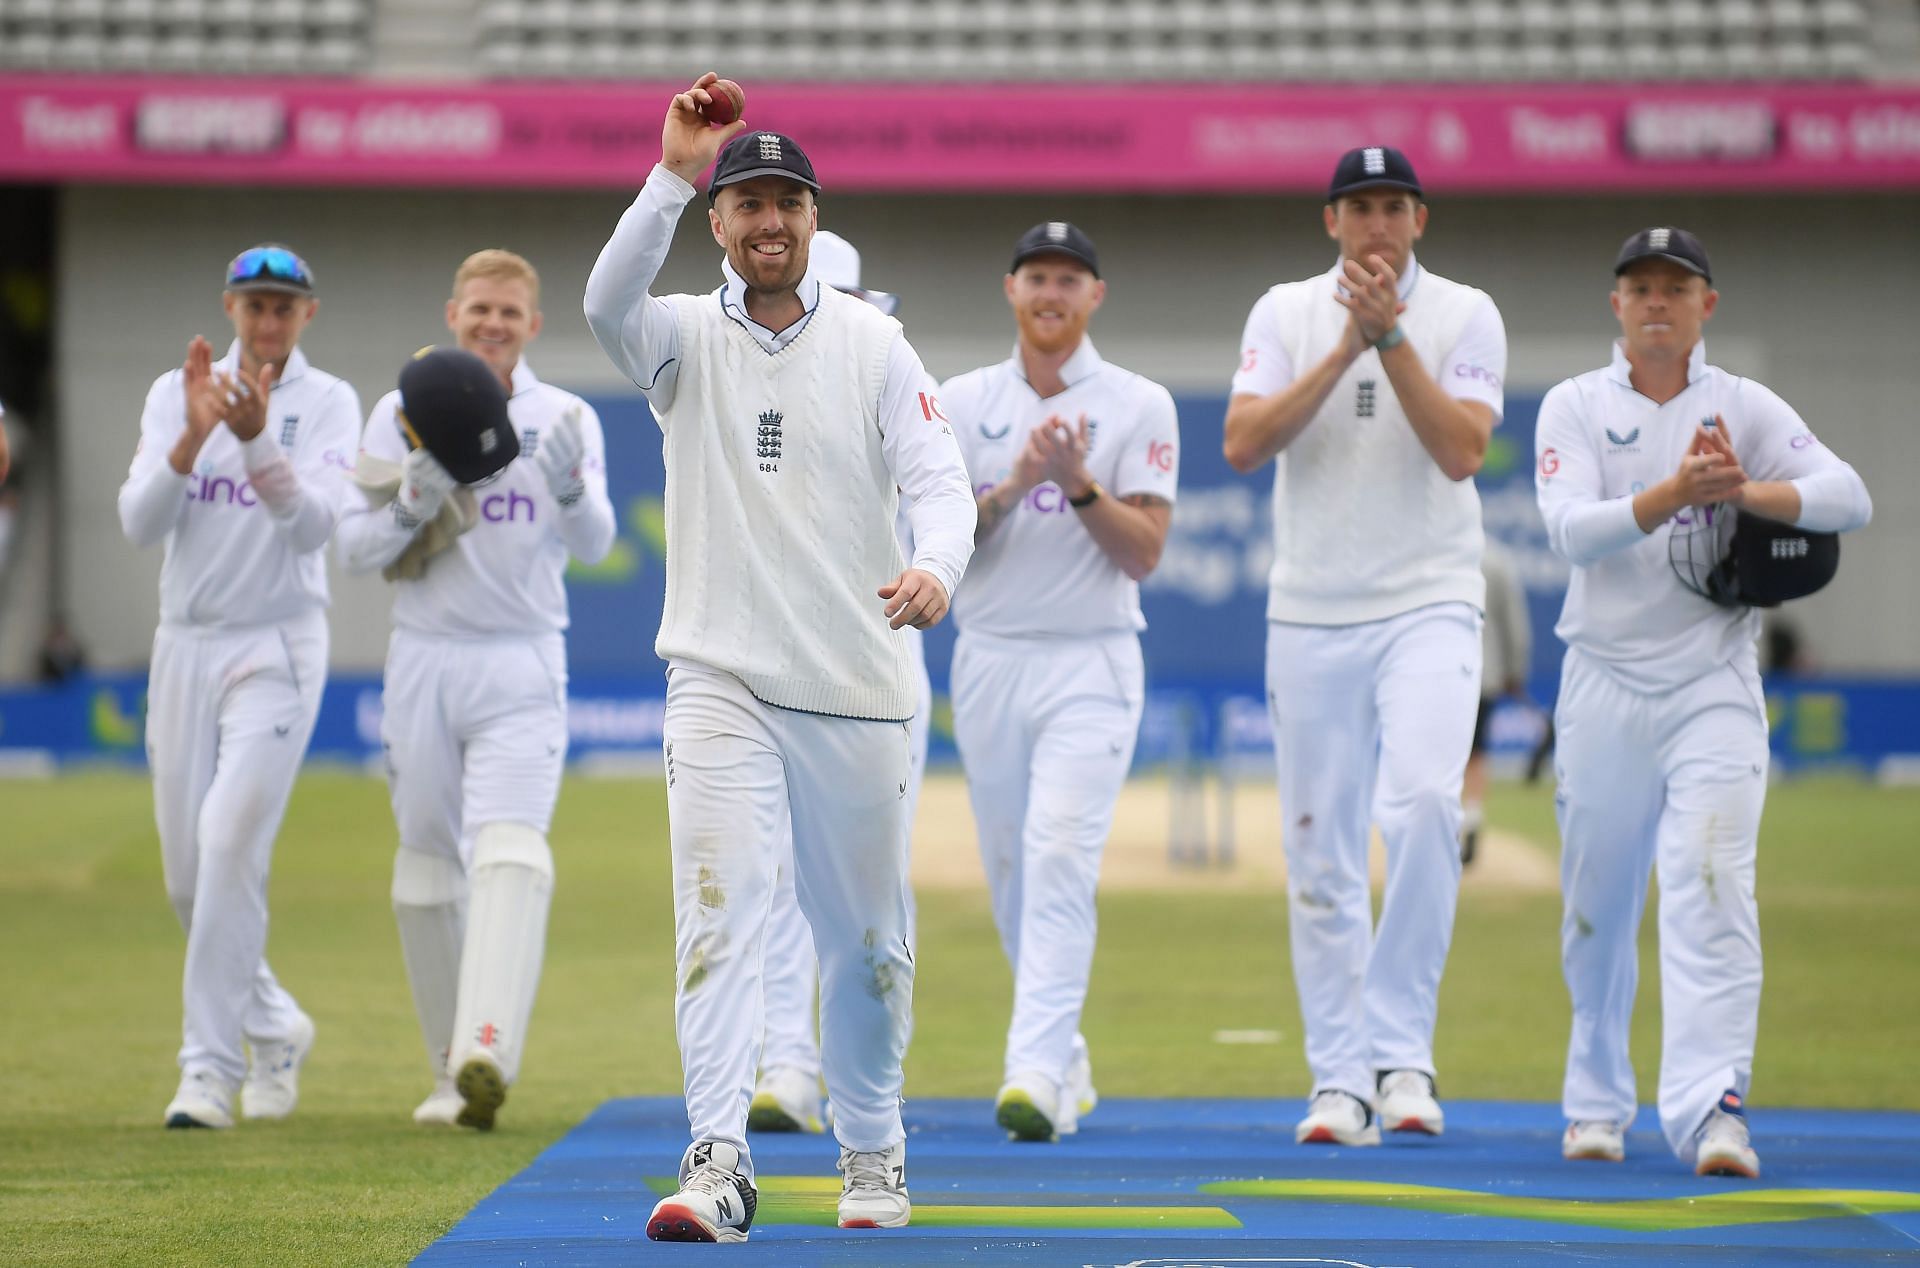 Jack Leach claimed his maiden ten-wicket haul in Test cricket. (Credits: Getty)